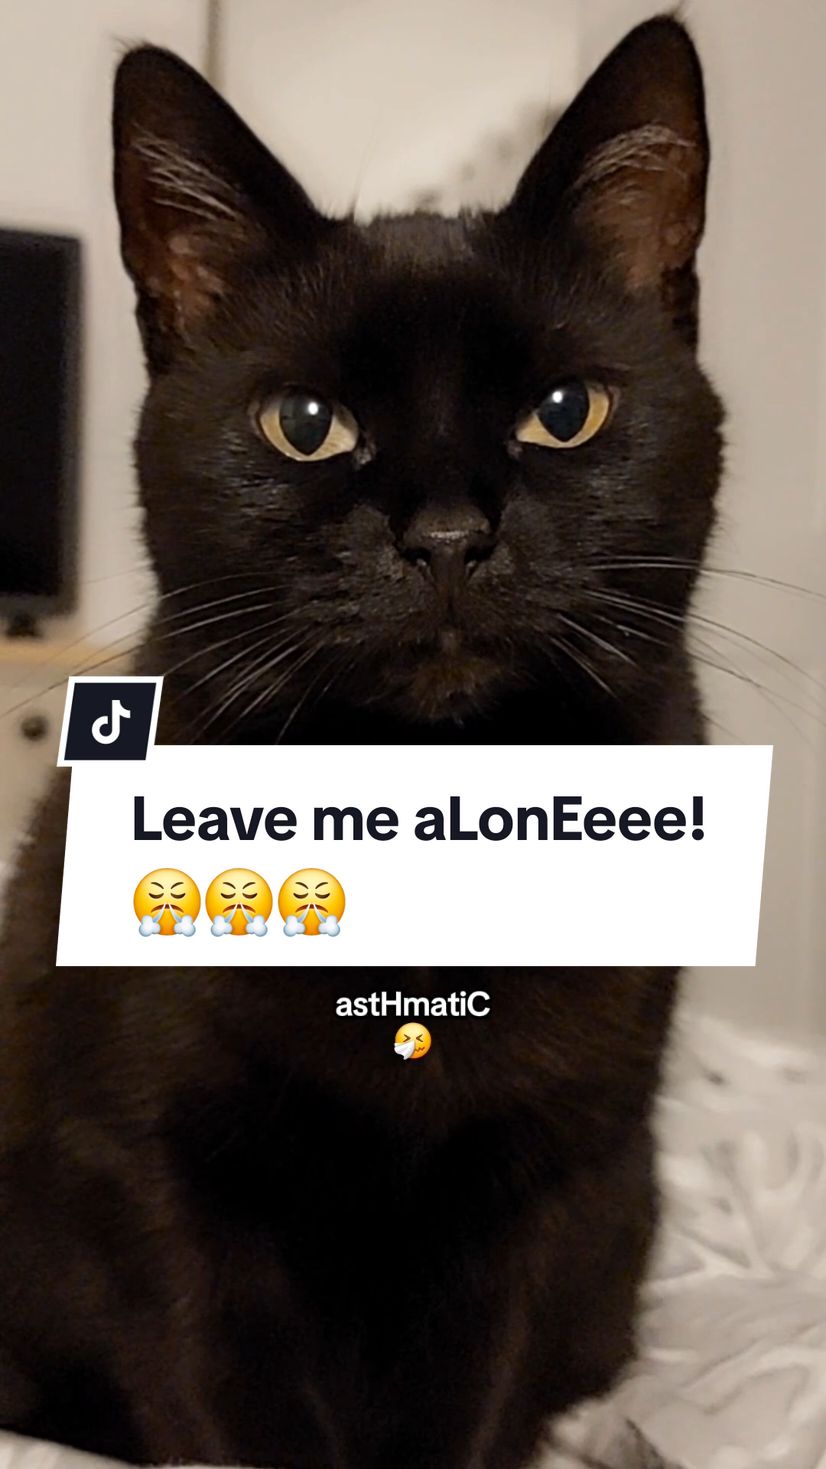 Leave me aLoneeee!😤 #funnyvideos #catsoftiktok #memes #funnycats #cats #kittytheduchess 